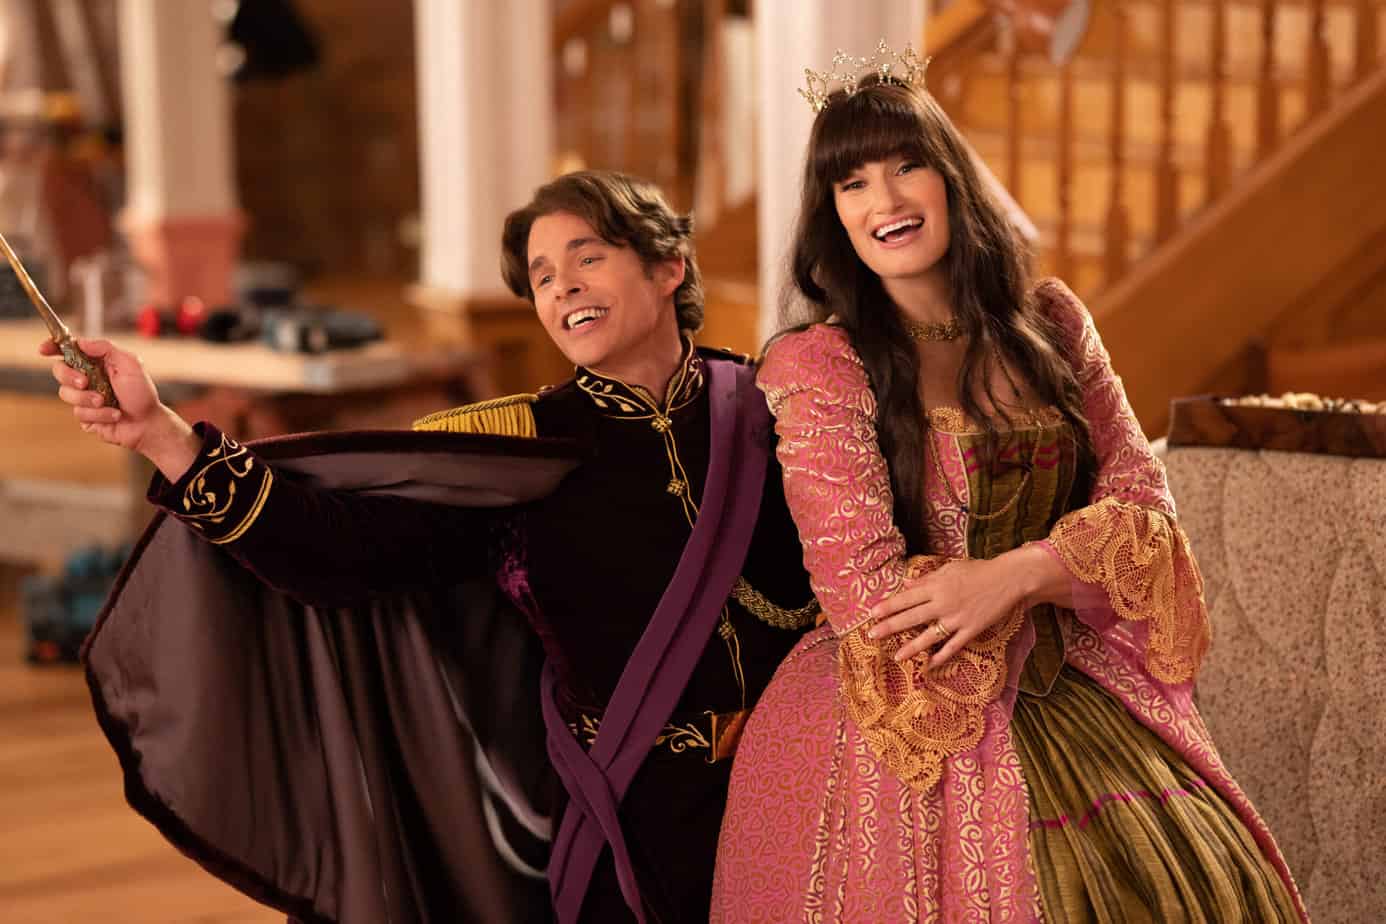 (L-R): James Marsden as Prince Edward and Idina Menzel as Nancy Tremaine. Disenchanted age rating: is this one kid friendly?